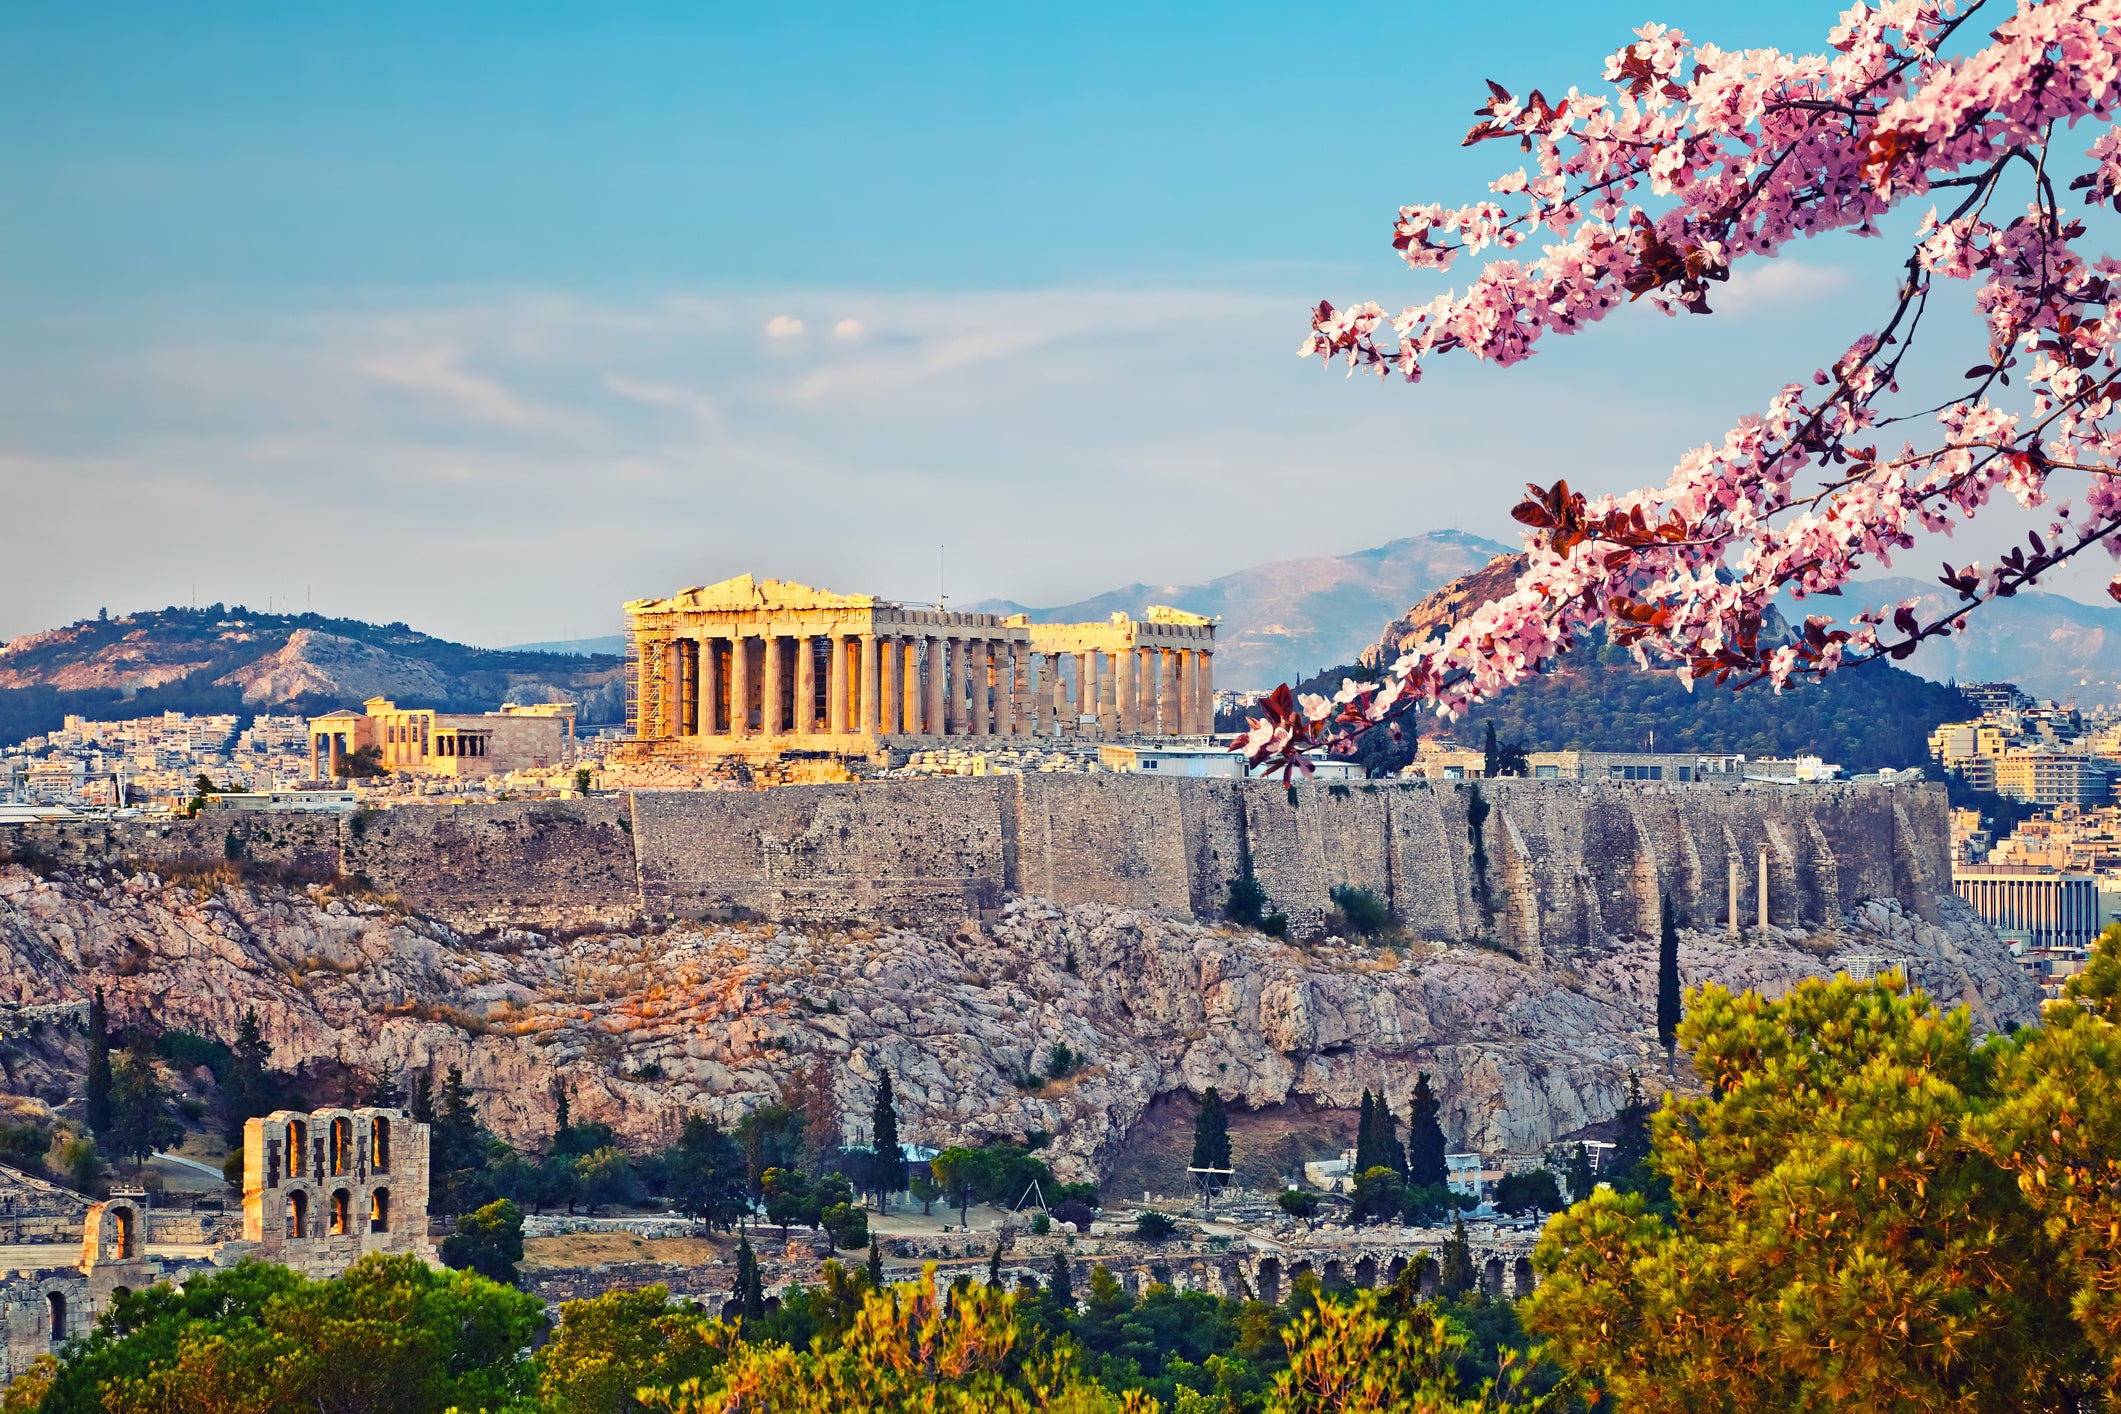 Acropolis in Athens at spring